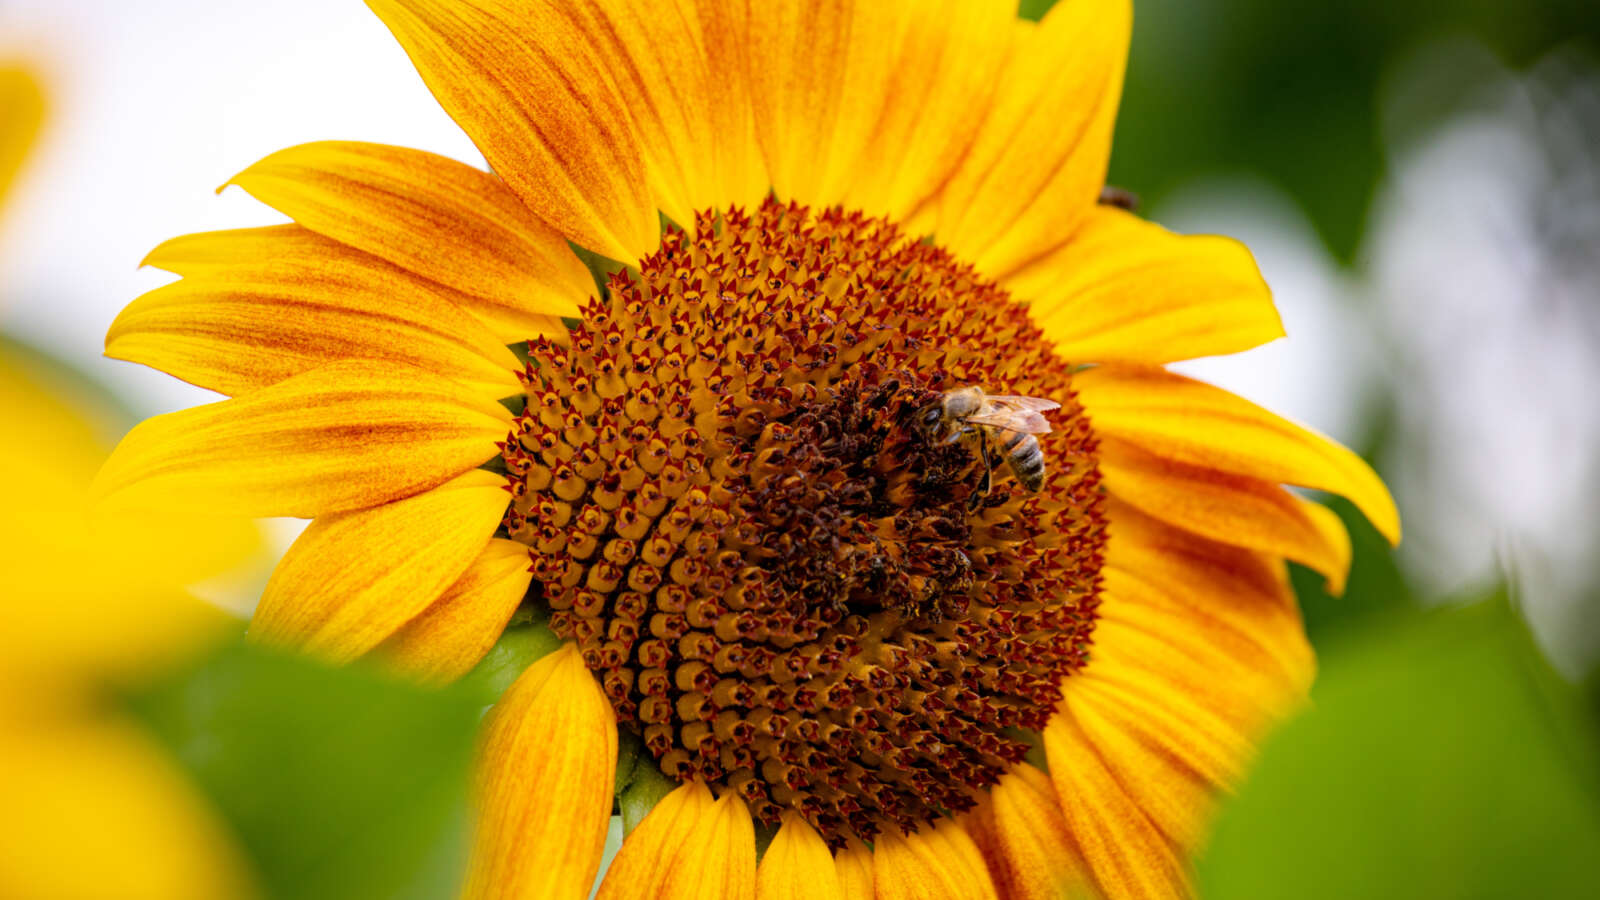 Bee hovering by a sunflower